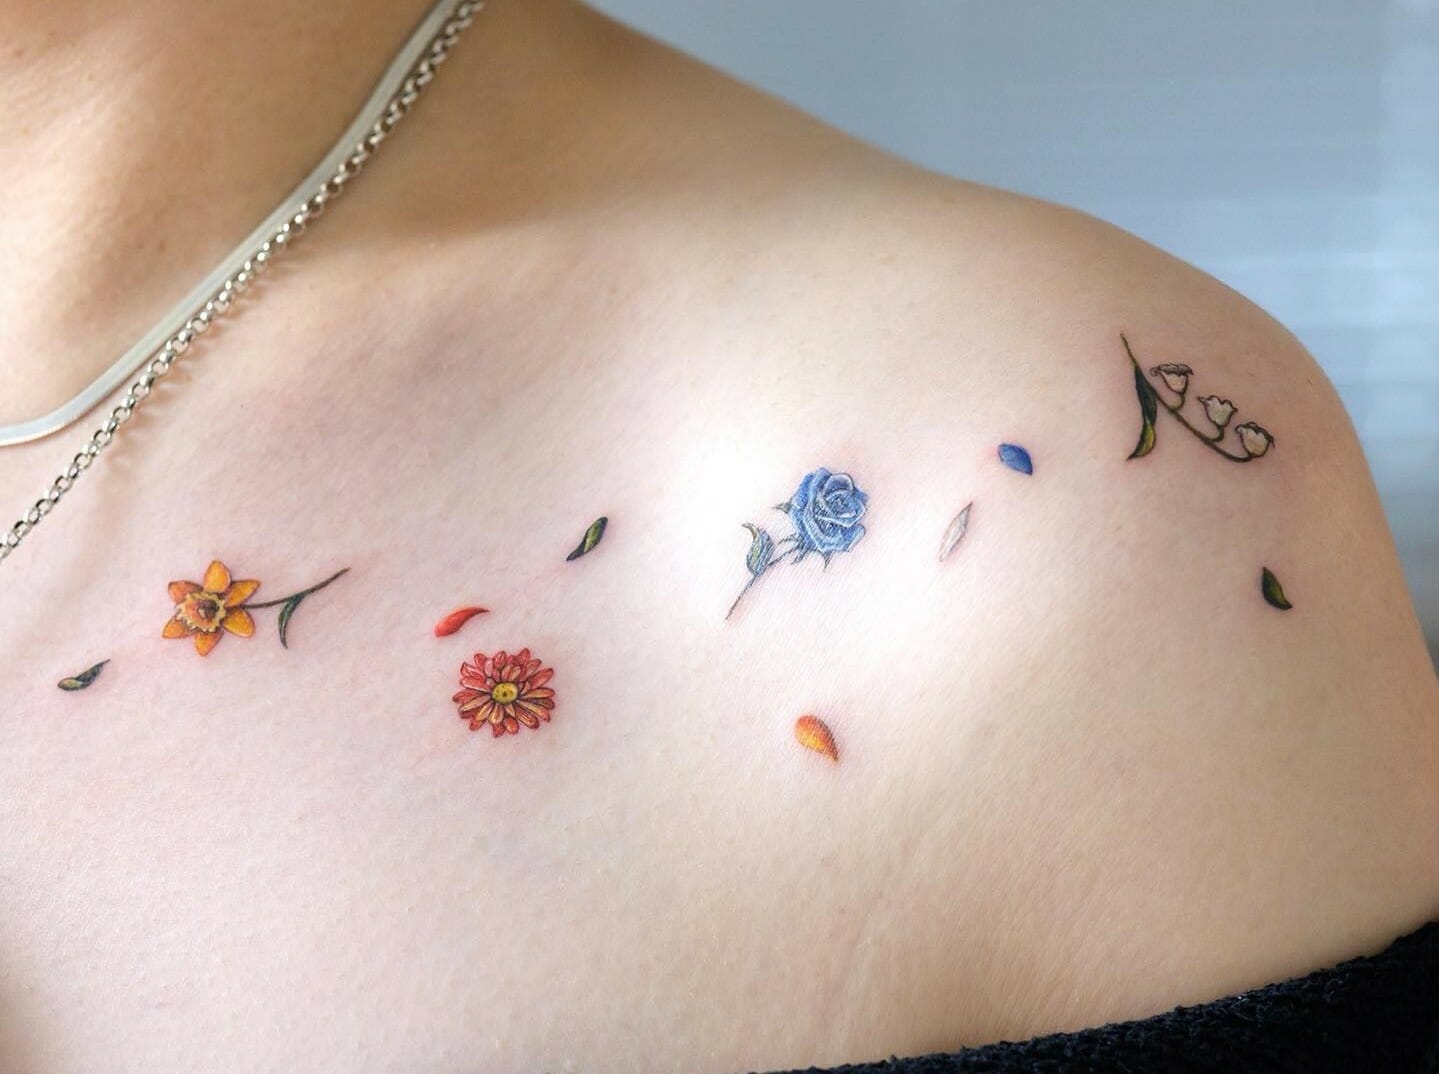 21 Sexy Designs To Make The Most Of A Shoulder Tattoo - Cultura Colectiva